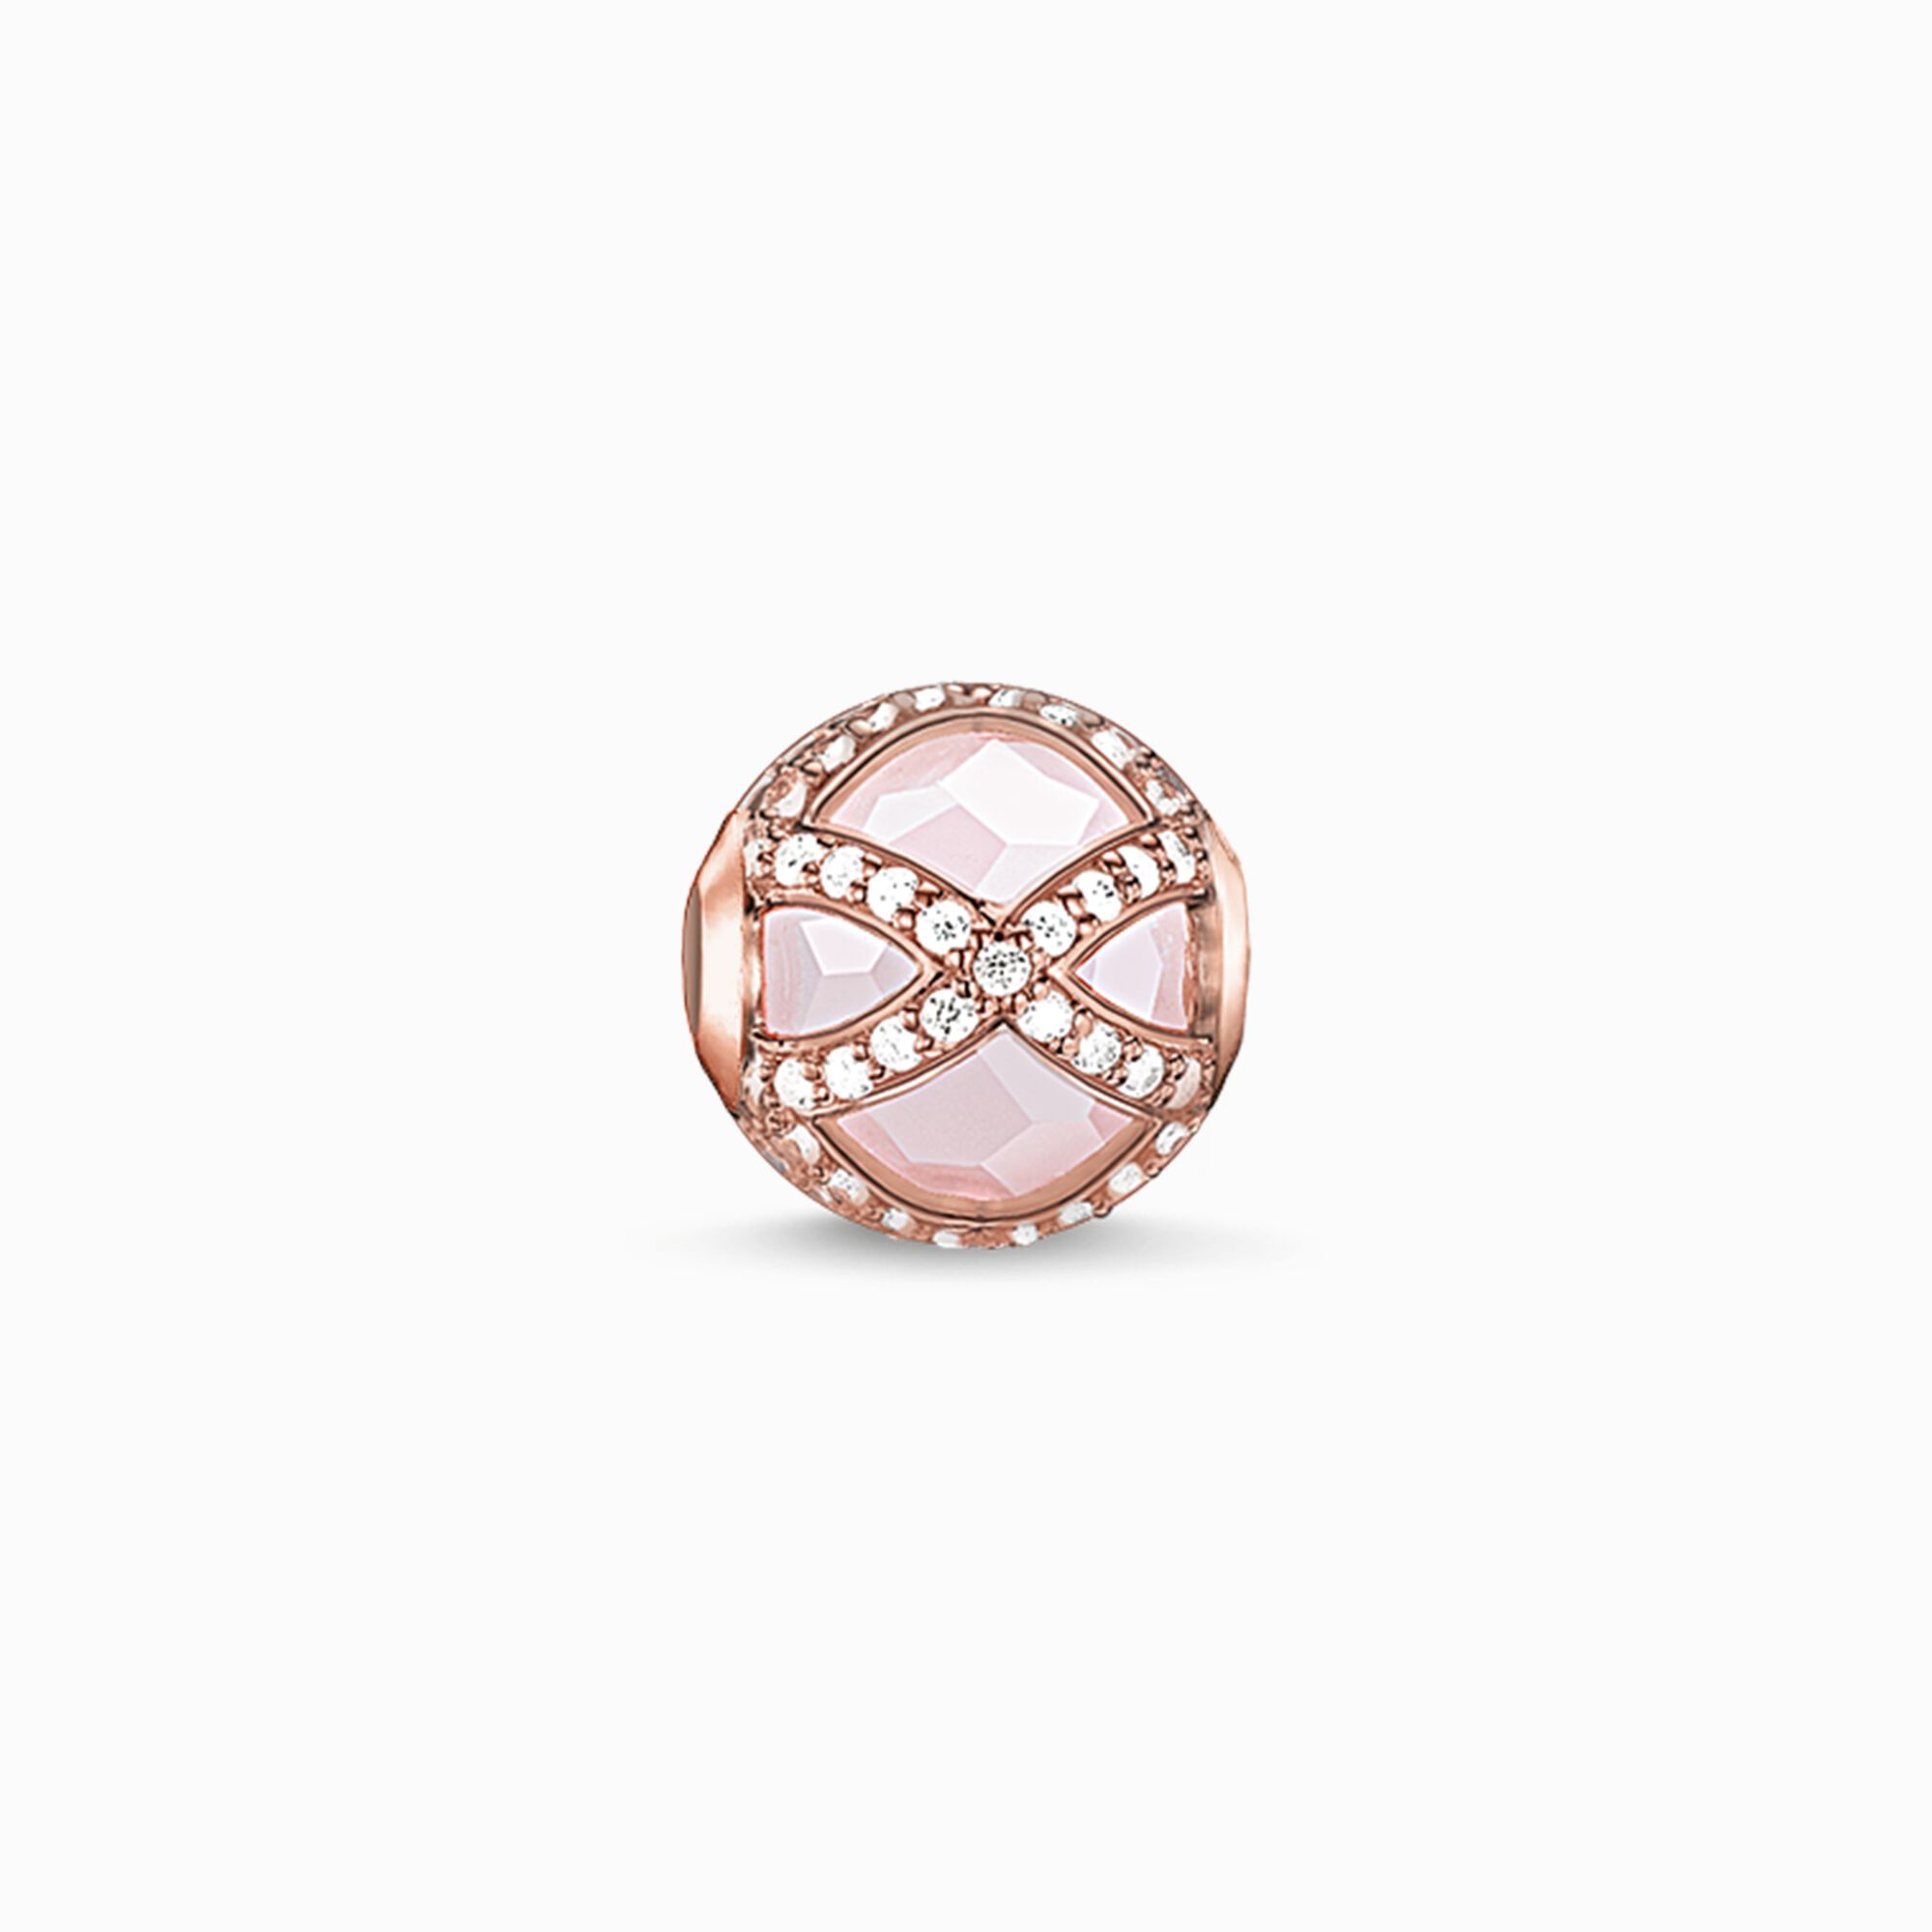 Bead pink Maharani from the Karma Beads collection in the THOMAS SABO online store